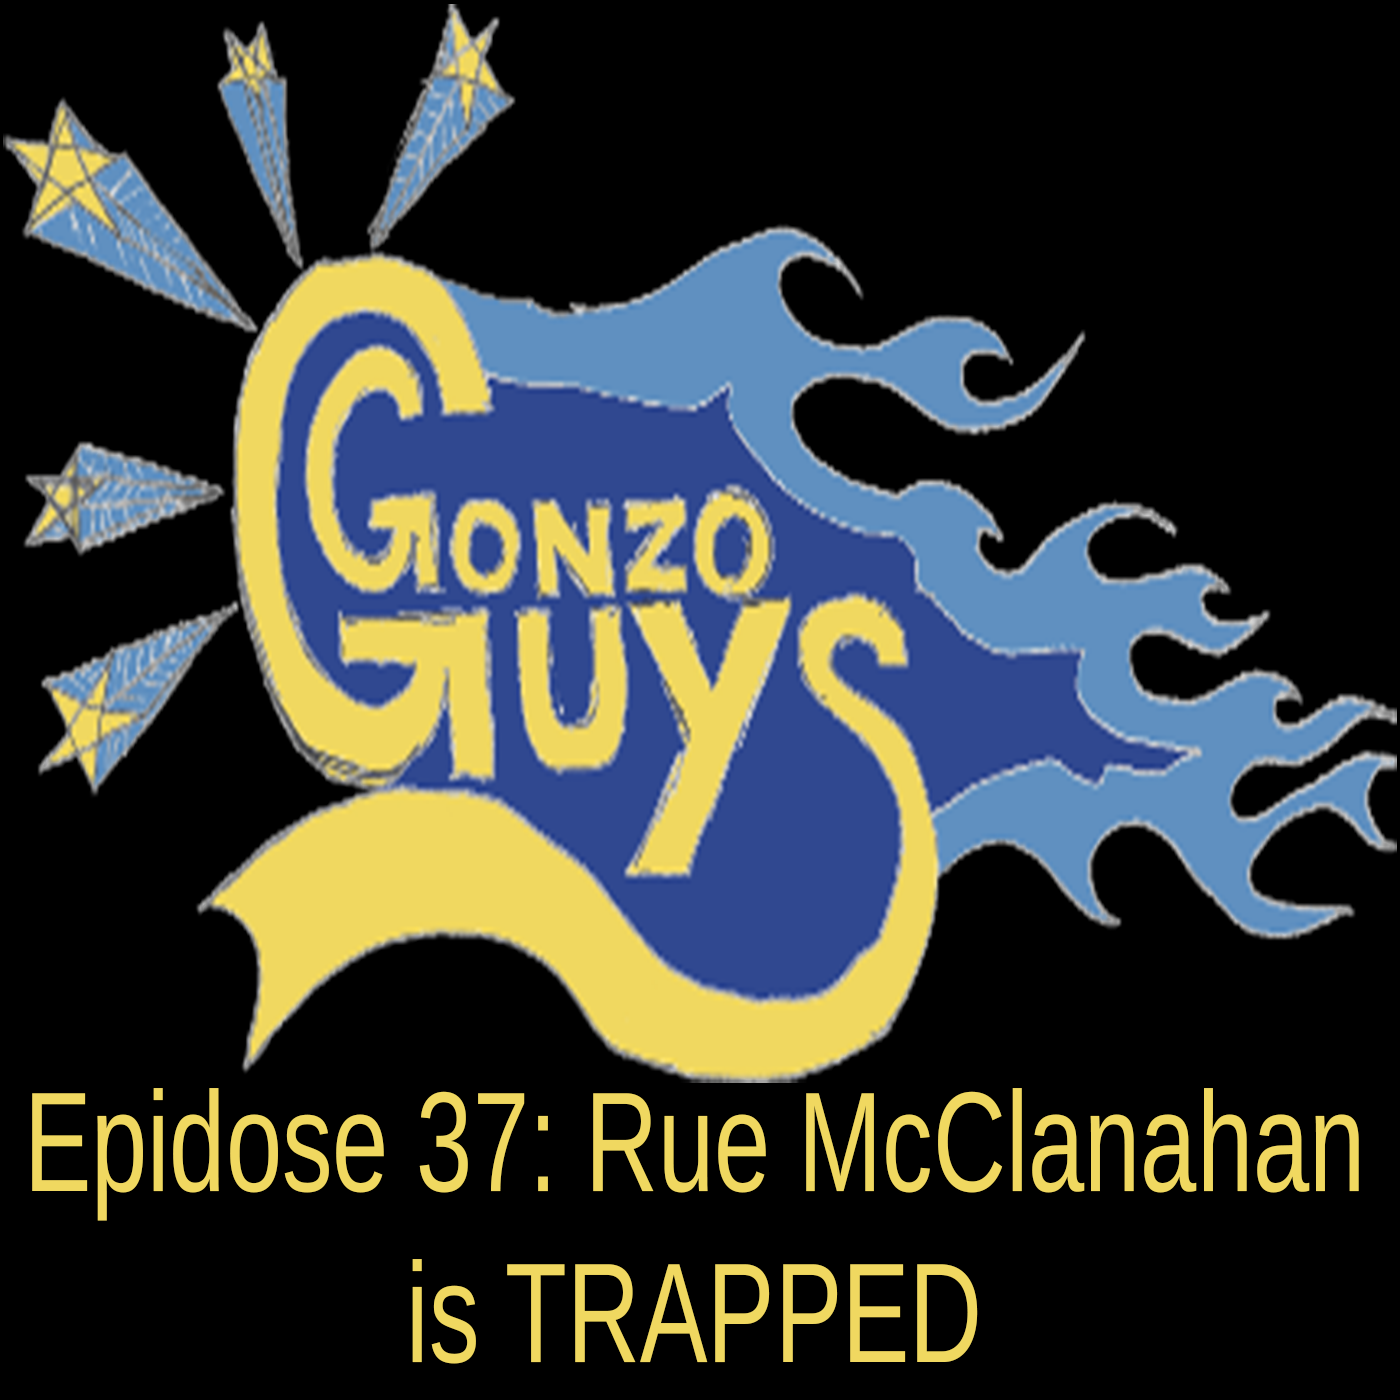 Gonzo Guys Podcast Epidose 37: Rue McClanahan is TRAPPED